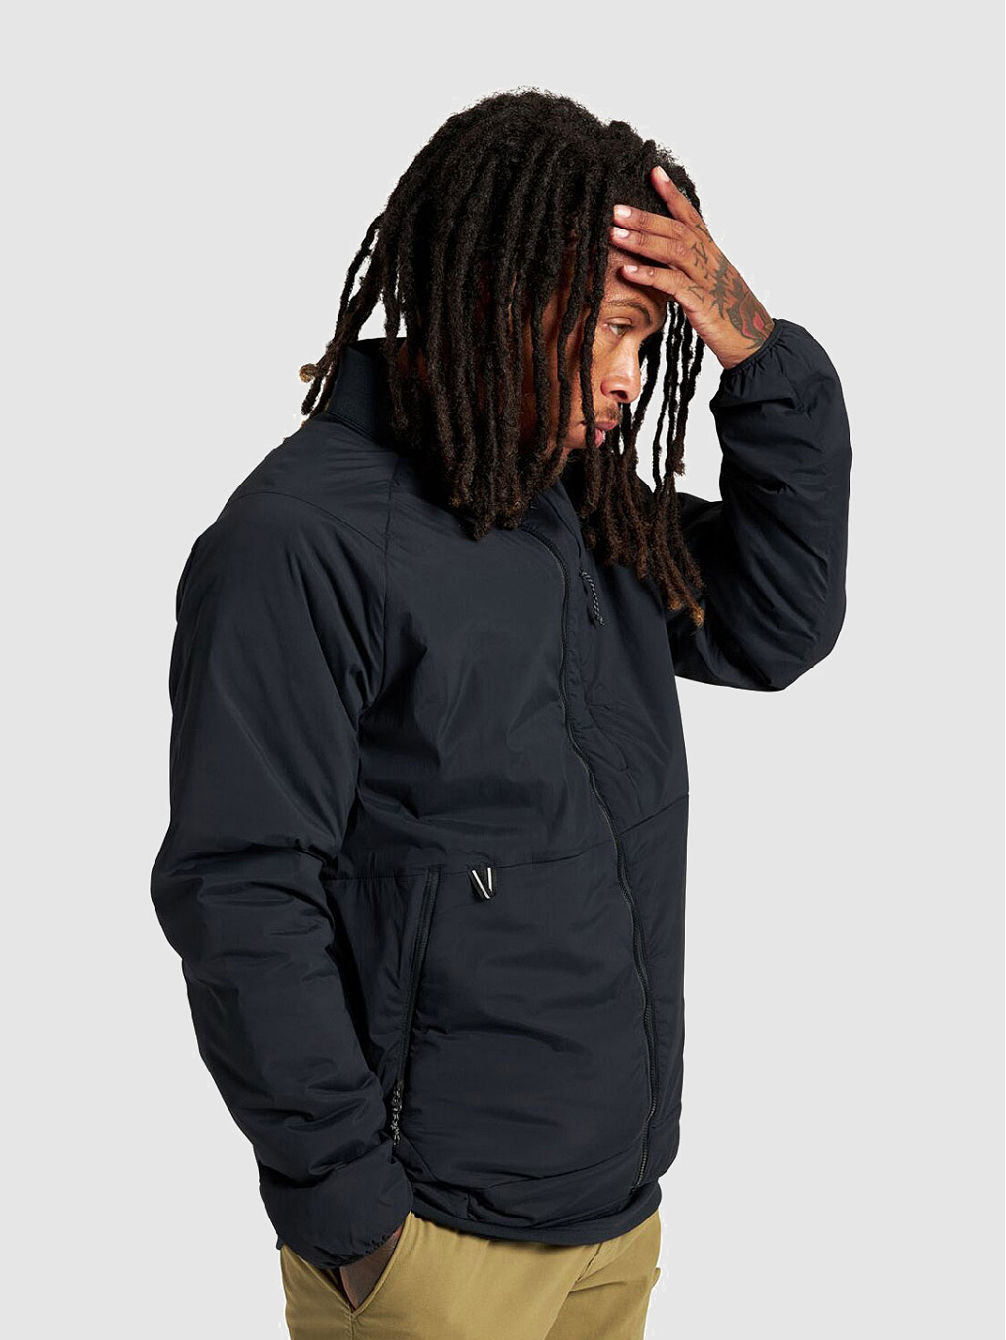 Multipath Insulated Jacket